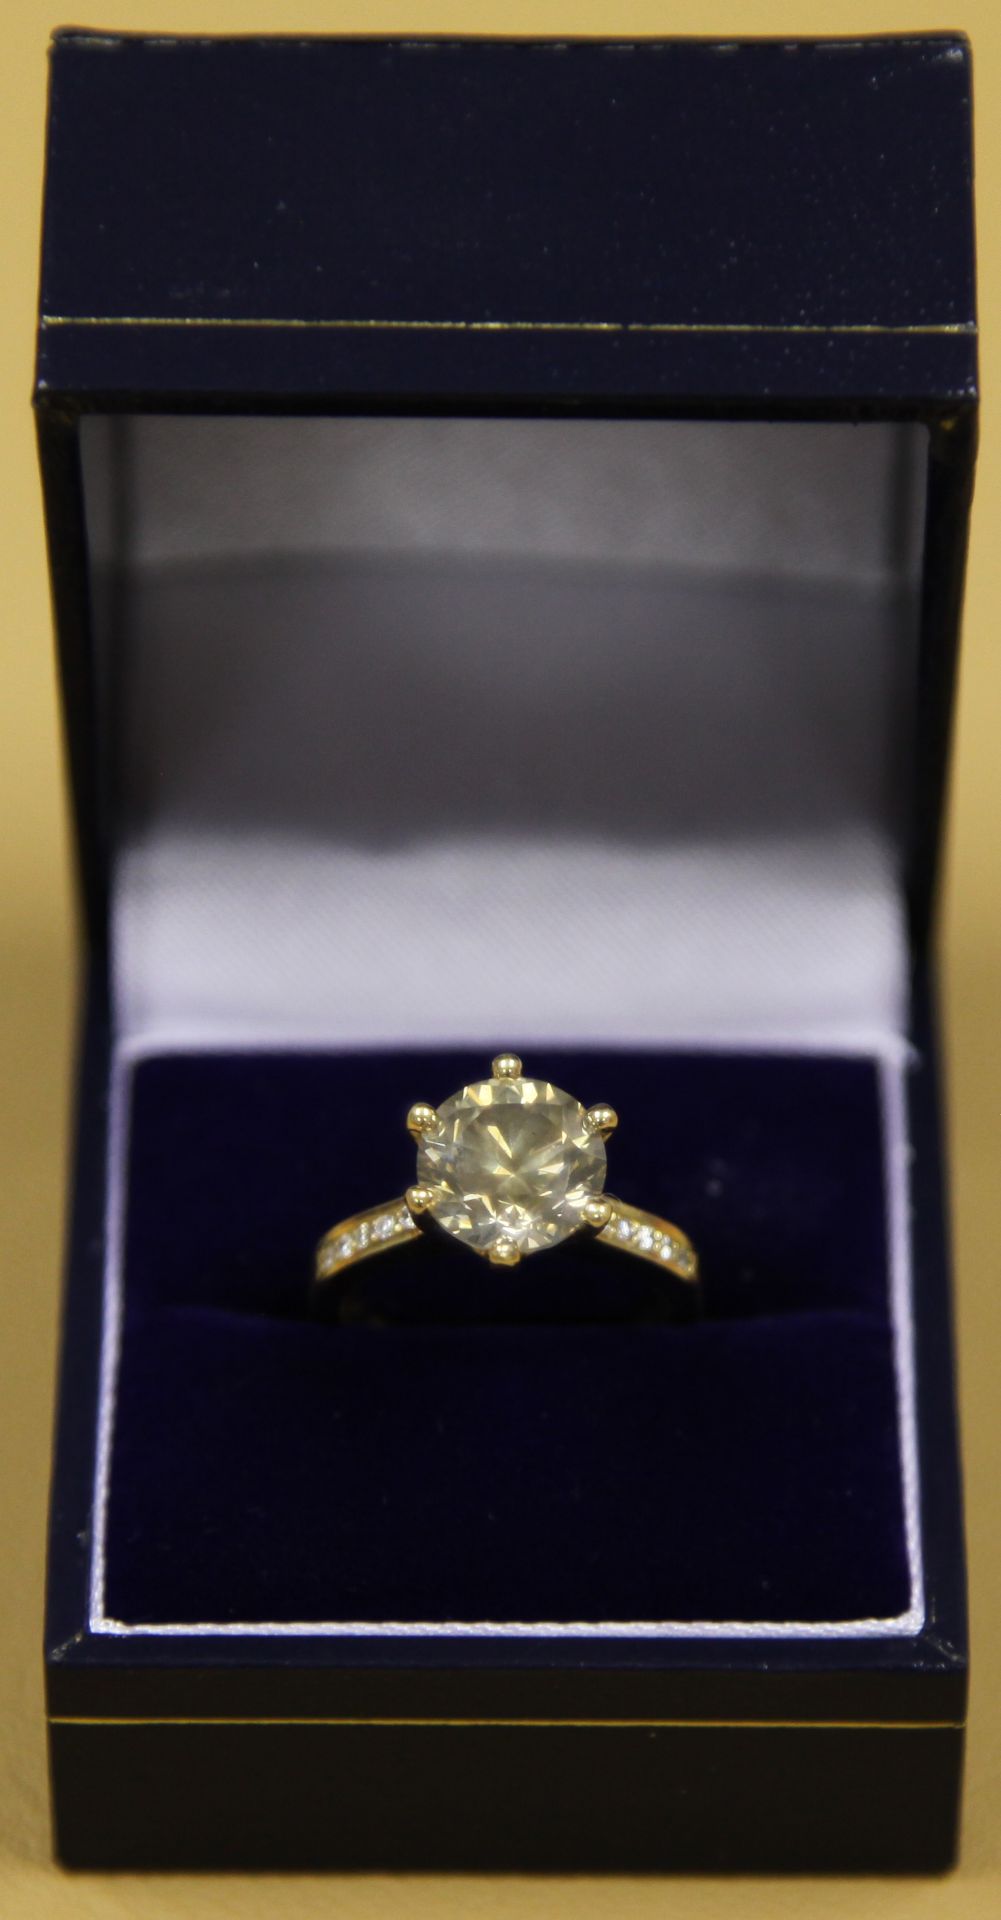 A 3.5 Carat Diamond Solitaire Ring, With a 3.0 carat single diamond, mounted in 18 carat gold, - Image 2 of 6